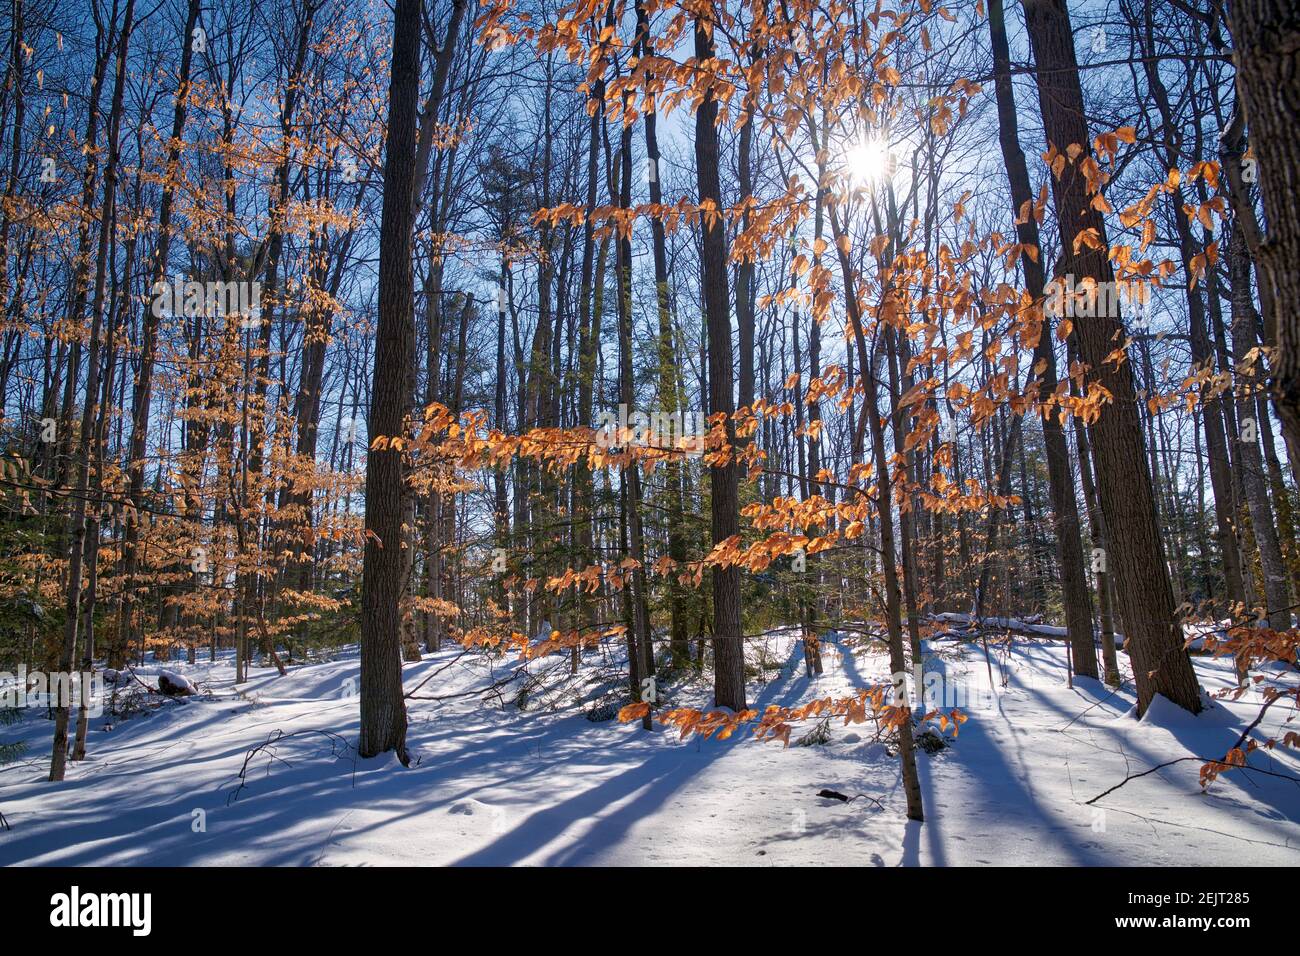 Vibrant color of the oak leaves after a snowfall In the early winter In the forest. Stock Photo